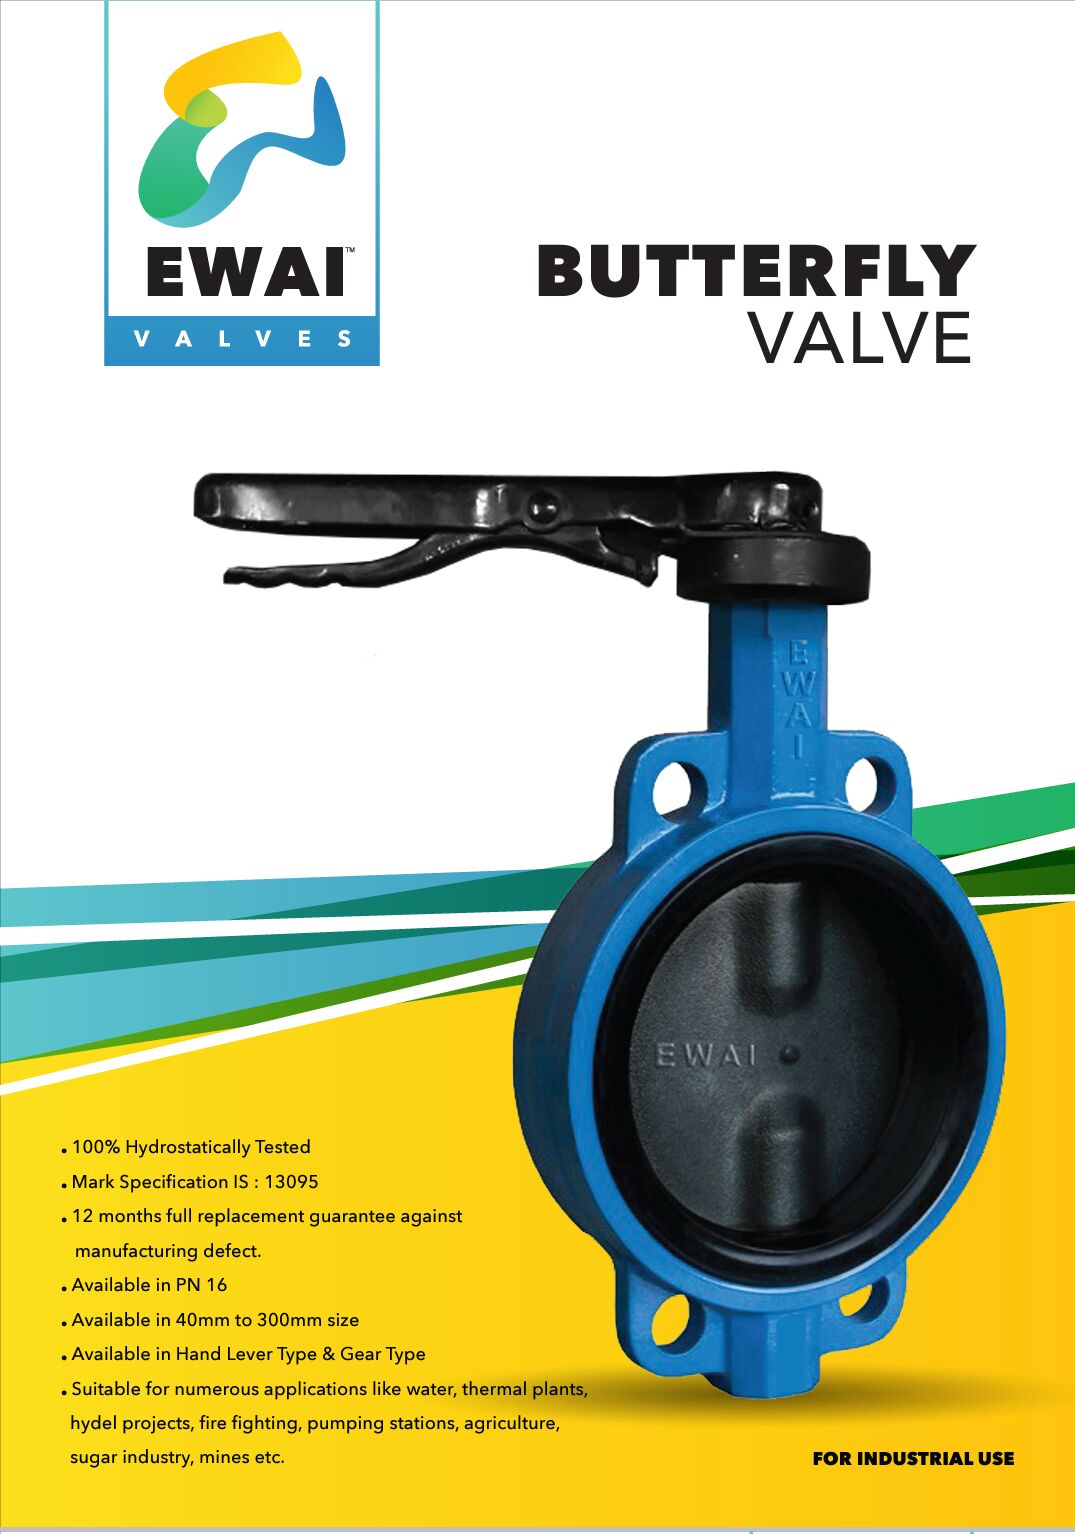 EWAI 16 Kg/m2 Cast Iron Body SG Iron Disc Butterfly Valves, for Water Application, Port Size : 50mm